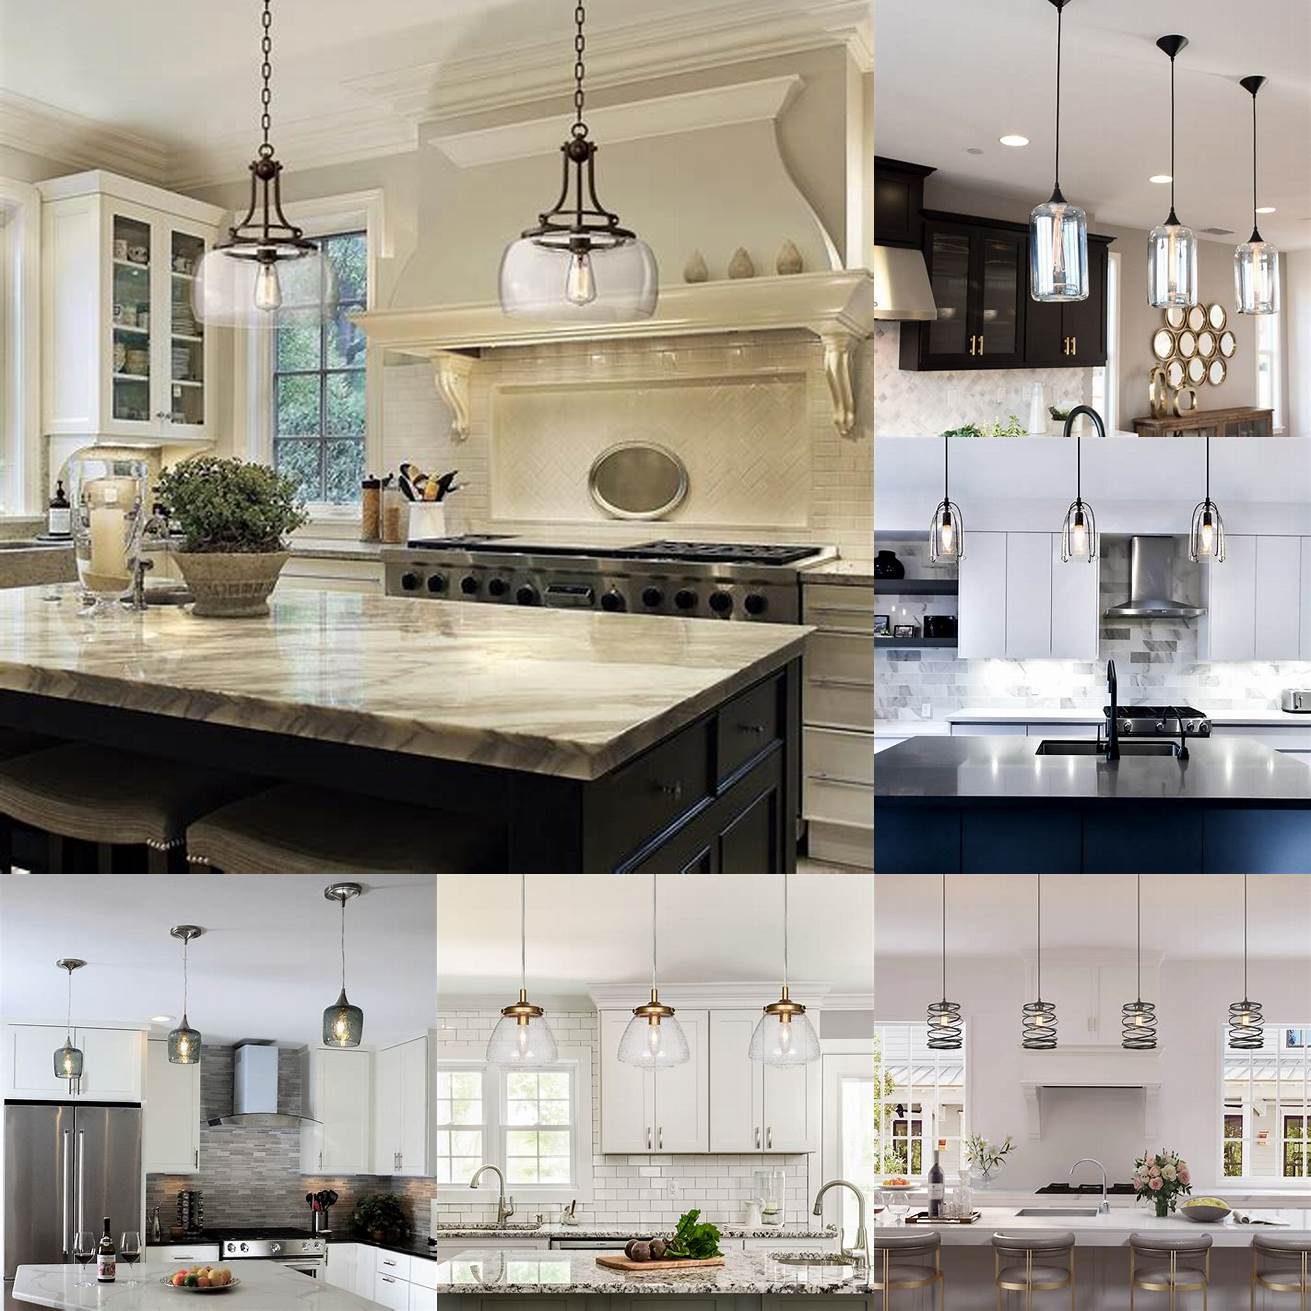 Glass pendant lights in a kitchen